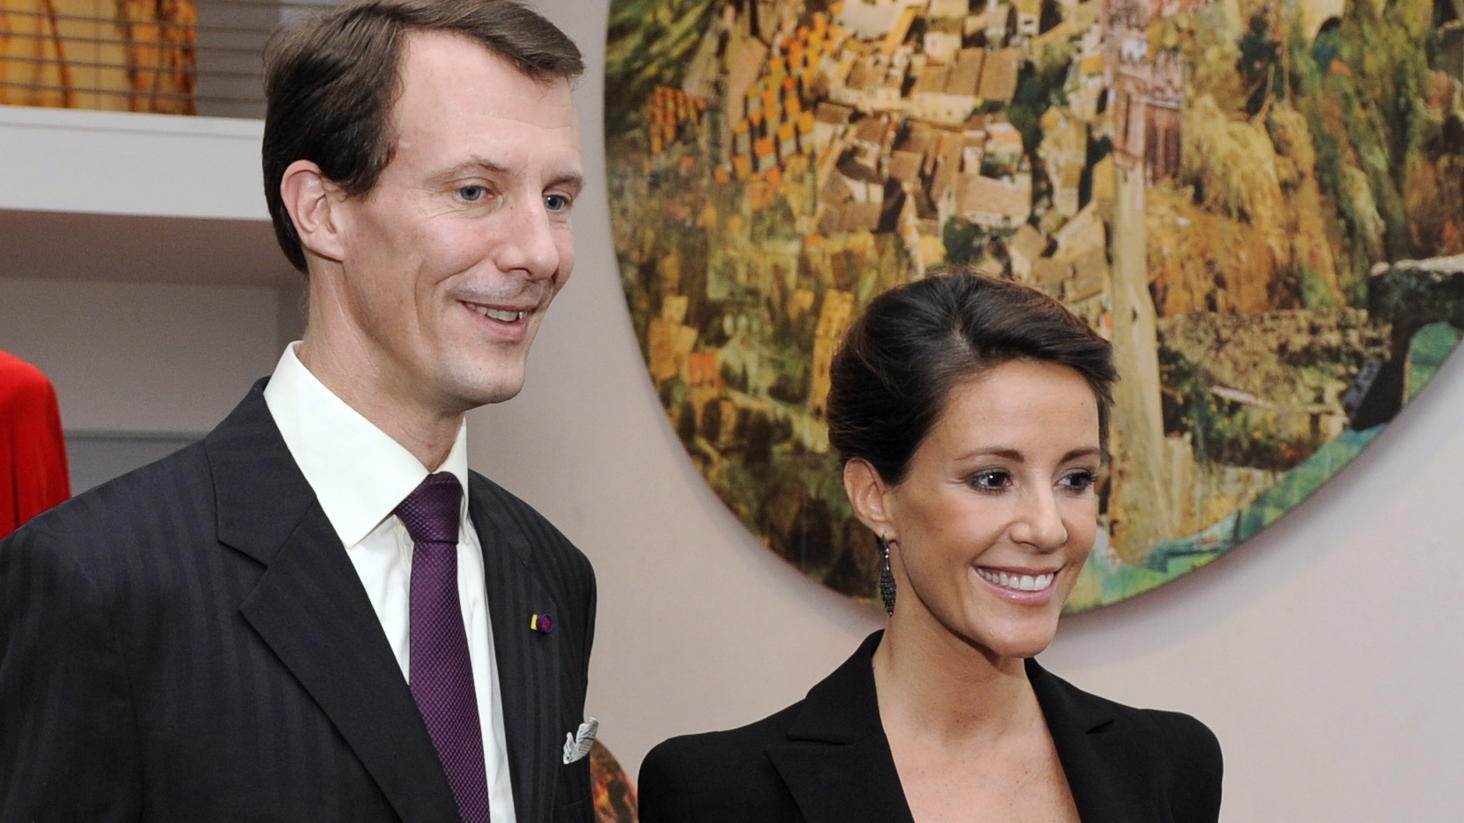 epa02990592 Danish Prince Joachim (L) and his wife Princess Marie (R) smile as they visit the Wild Swans Exhibition in Tokyo, Japan, 03 November 2011. The exhibition presents artworks by Queen Margrethe II based on the fairytale written in 1838 by Da